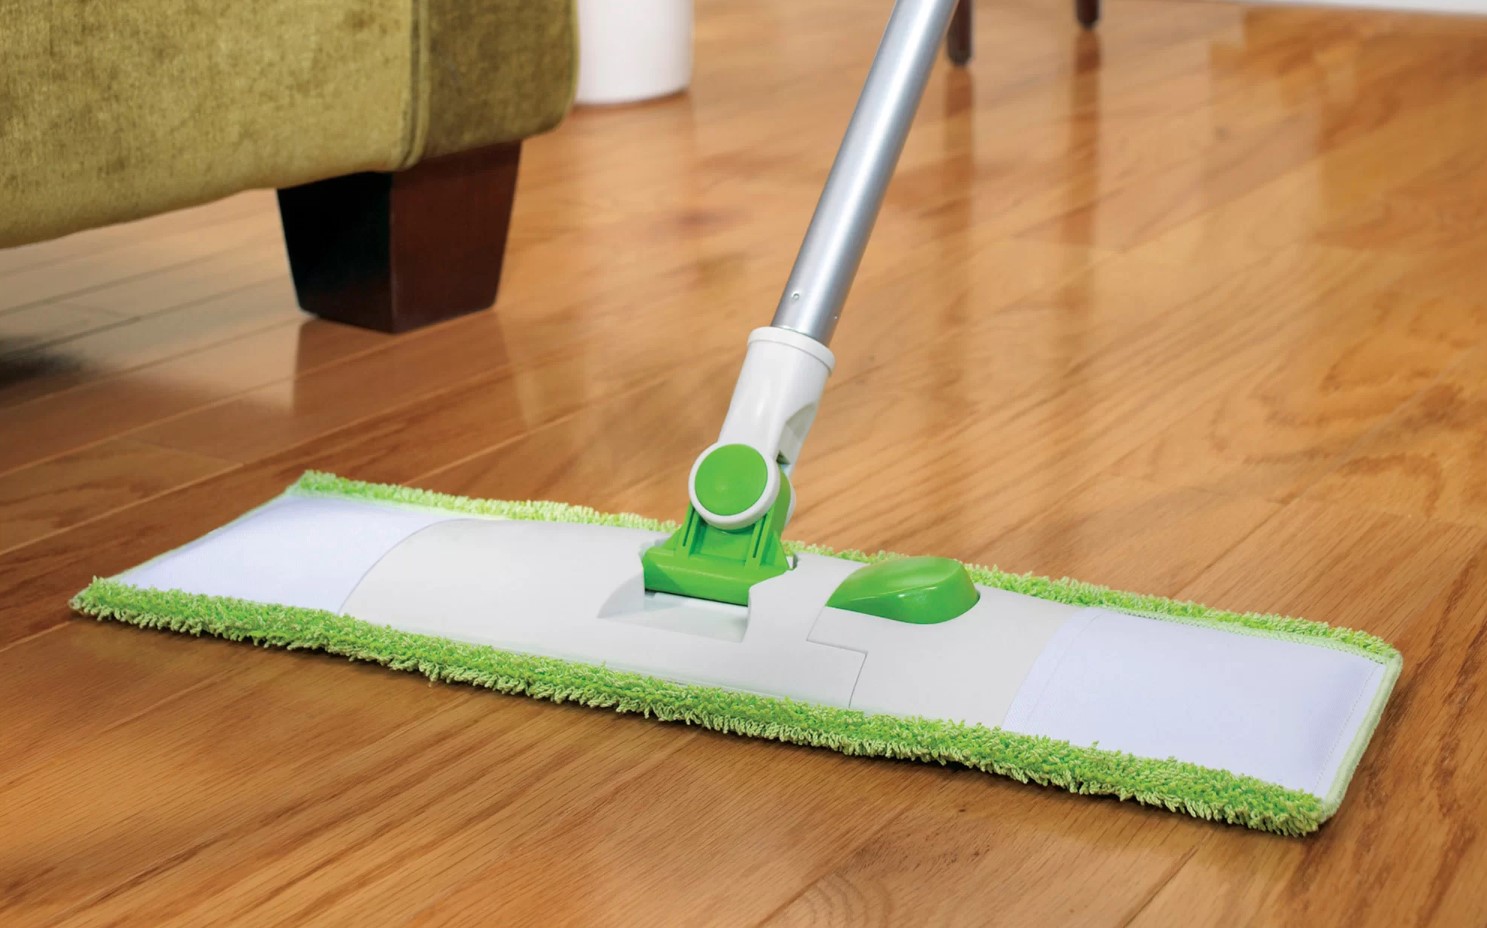 Make your floors crystal clean with Microfiber Mop